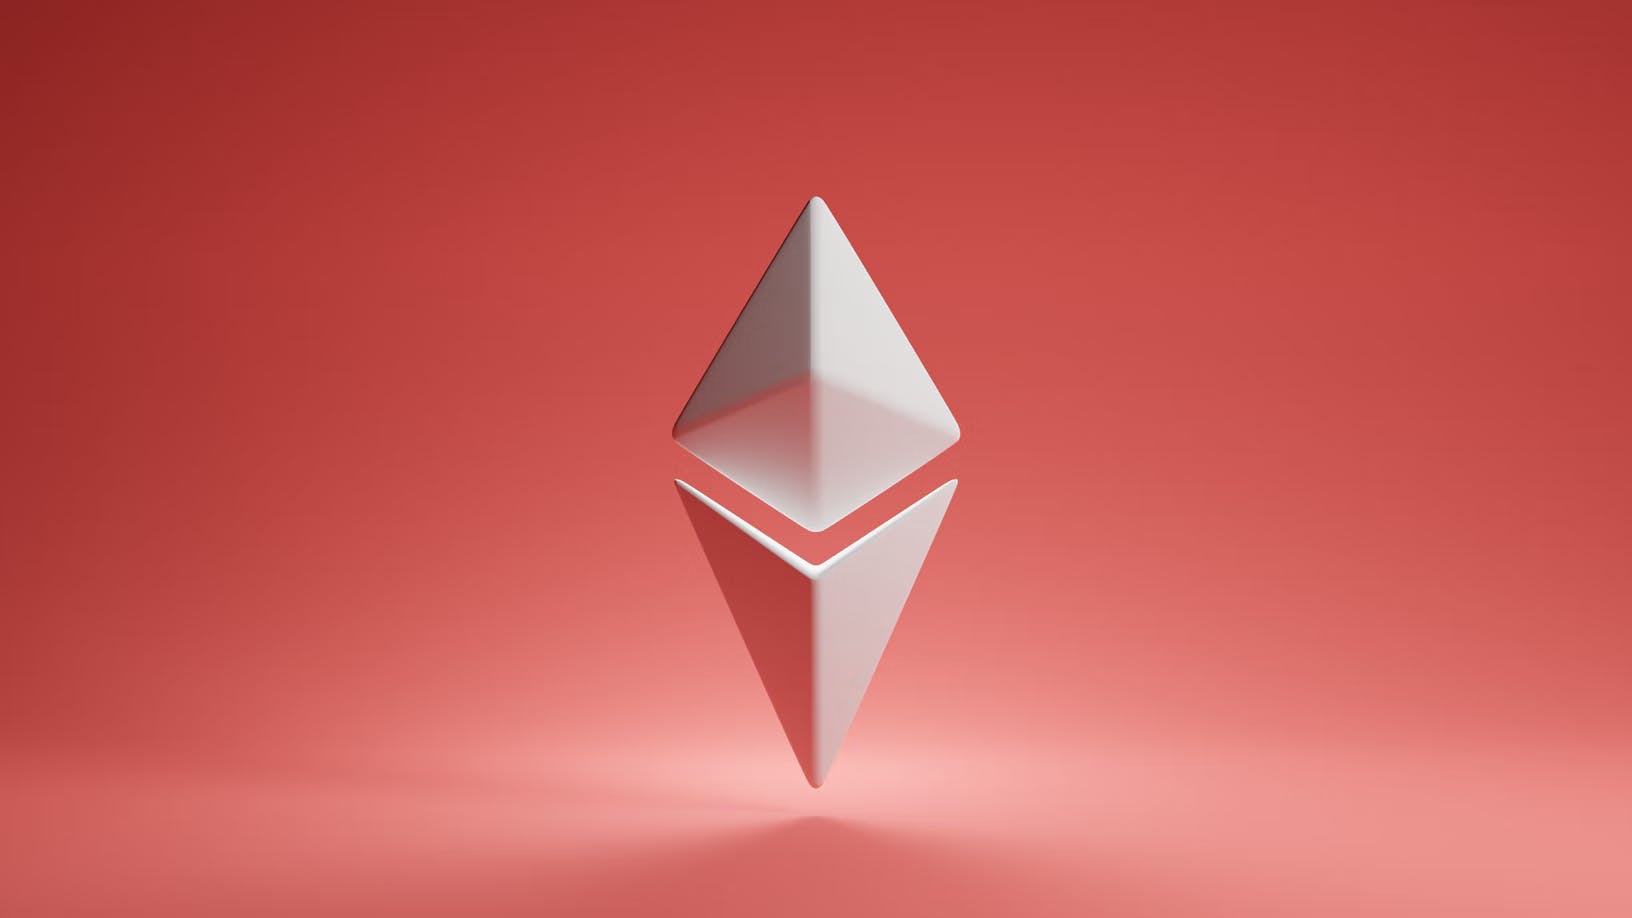 Ethereum is a decentralized, open-source blockchain with smart contract functionality.